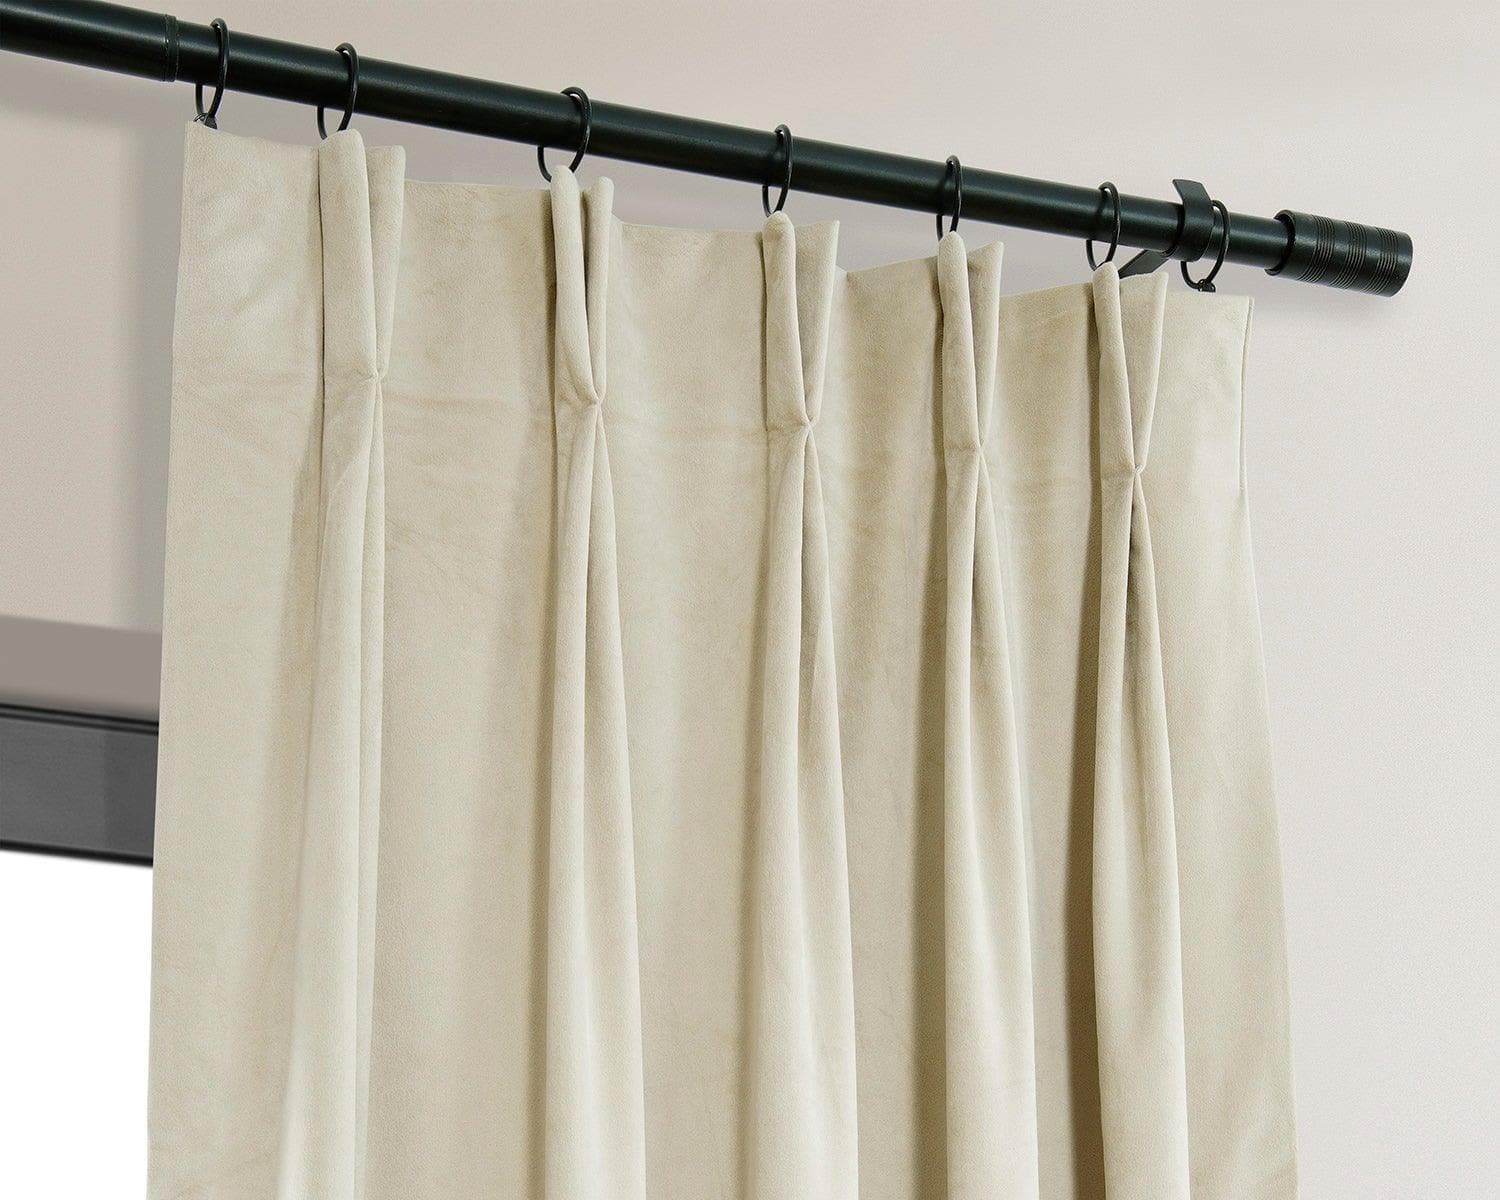 How To Hang Pleated Drapes